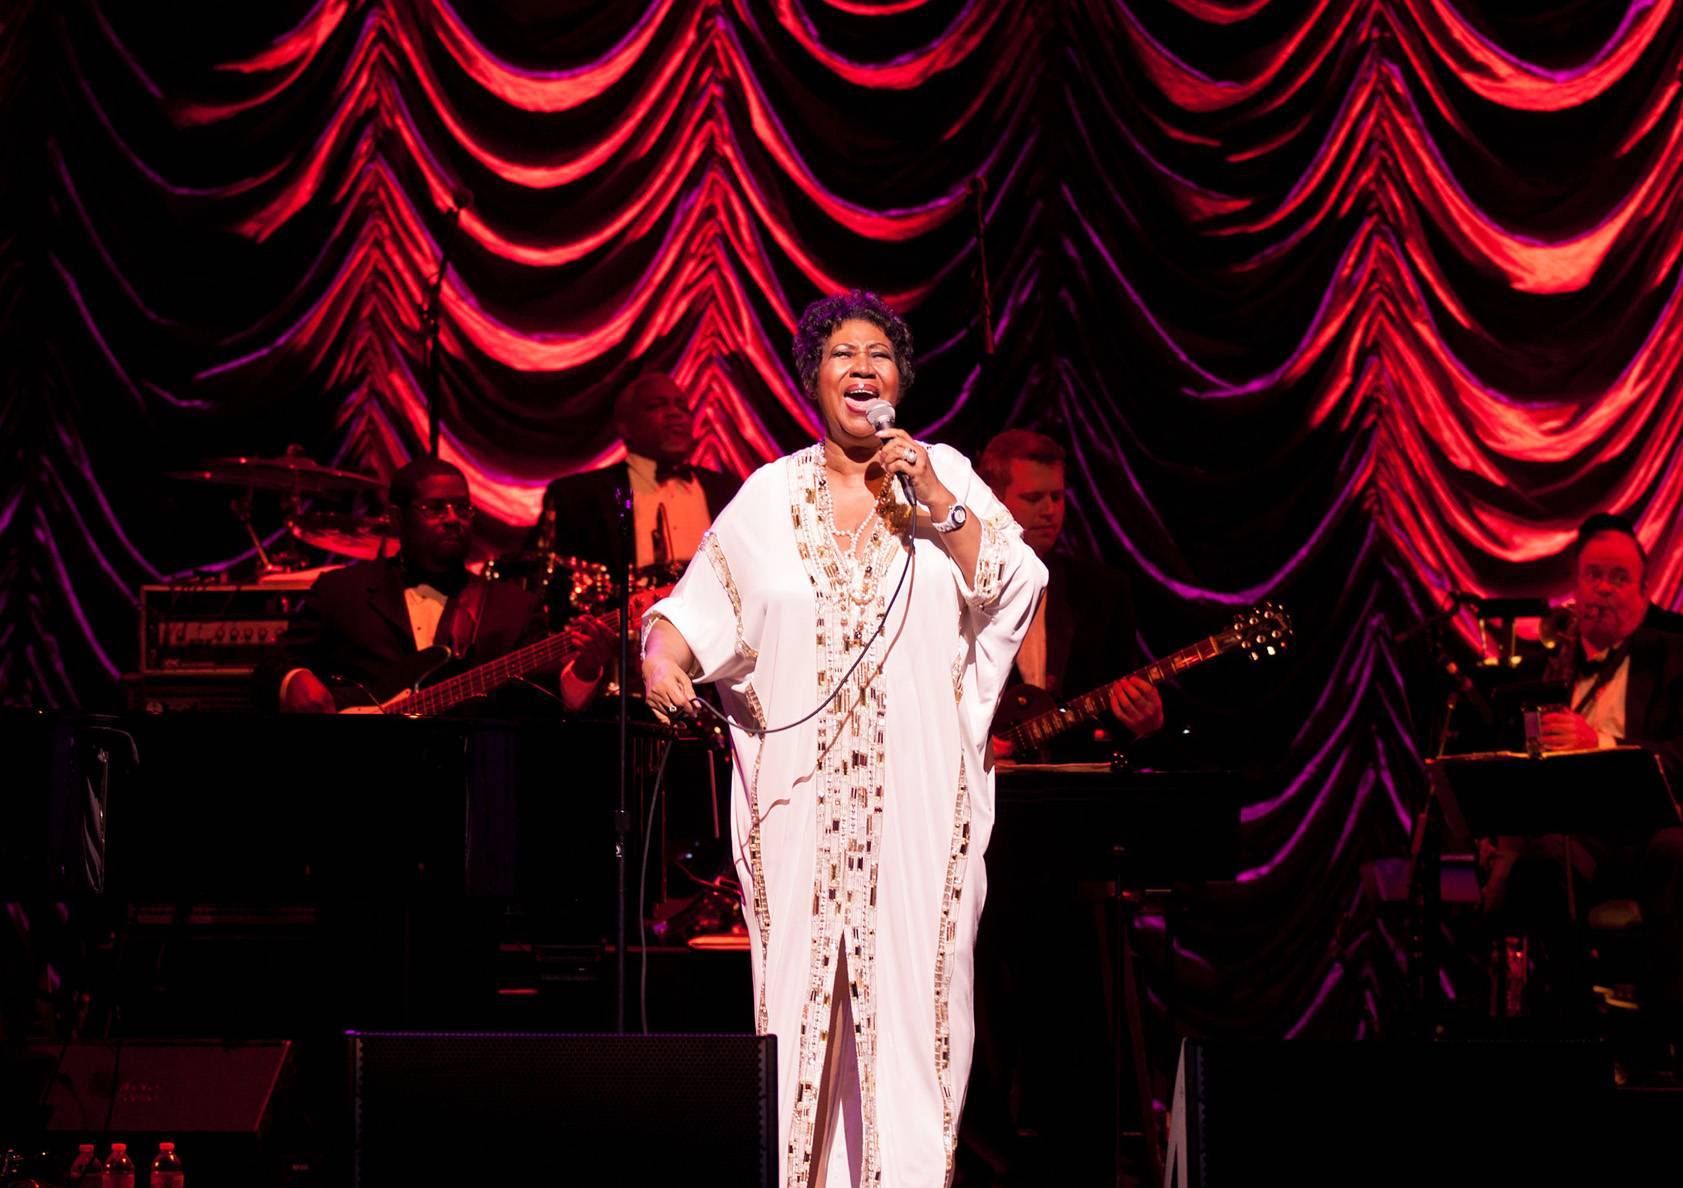 Queen Me - Aretha Franklin, the Queen of Soul, performing at the Austin City Limits Live Moody Theater in Austin, Texas. Just last week the 69-year-old diva was paid tribute by the Rock and Roll Hall of Fame. The ceremony included performances by Lauryn Hill, Ron Isley, Chaka Khan and Dennis Edwards of the Temptations. (Photo: WENN.com)